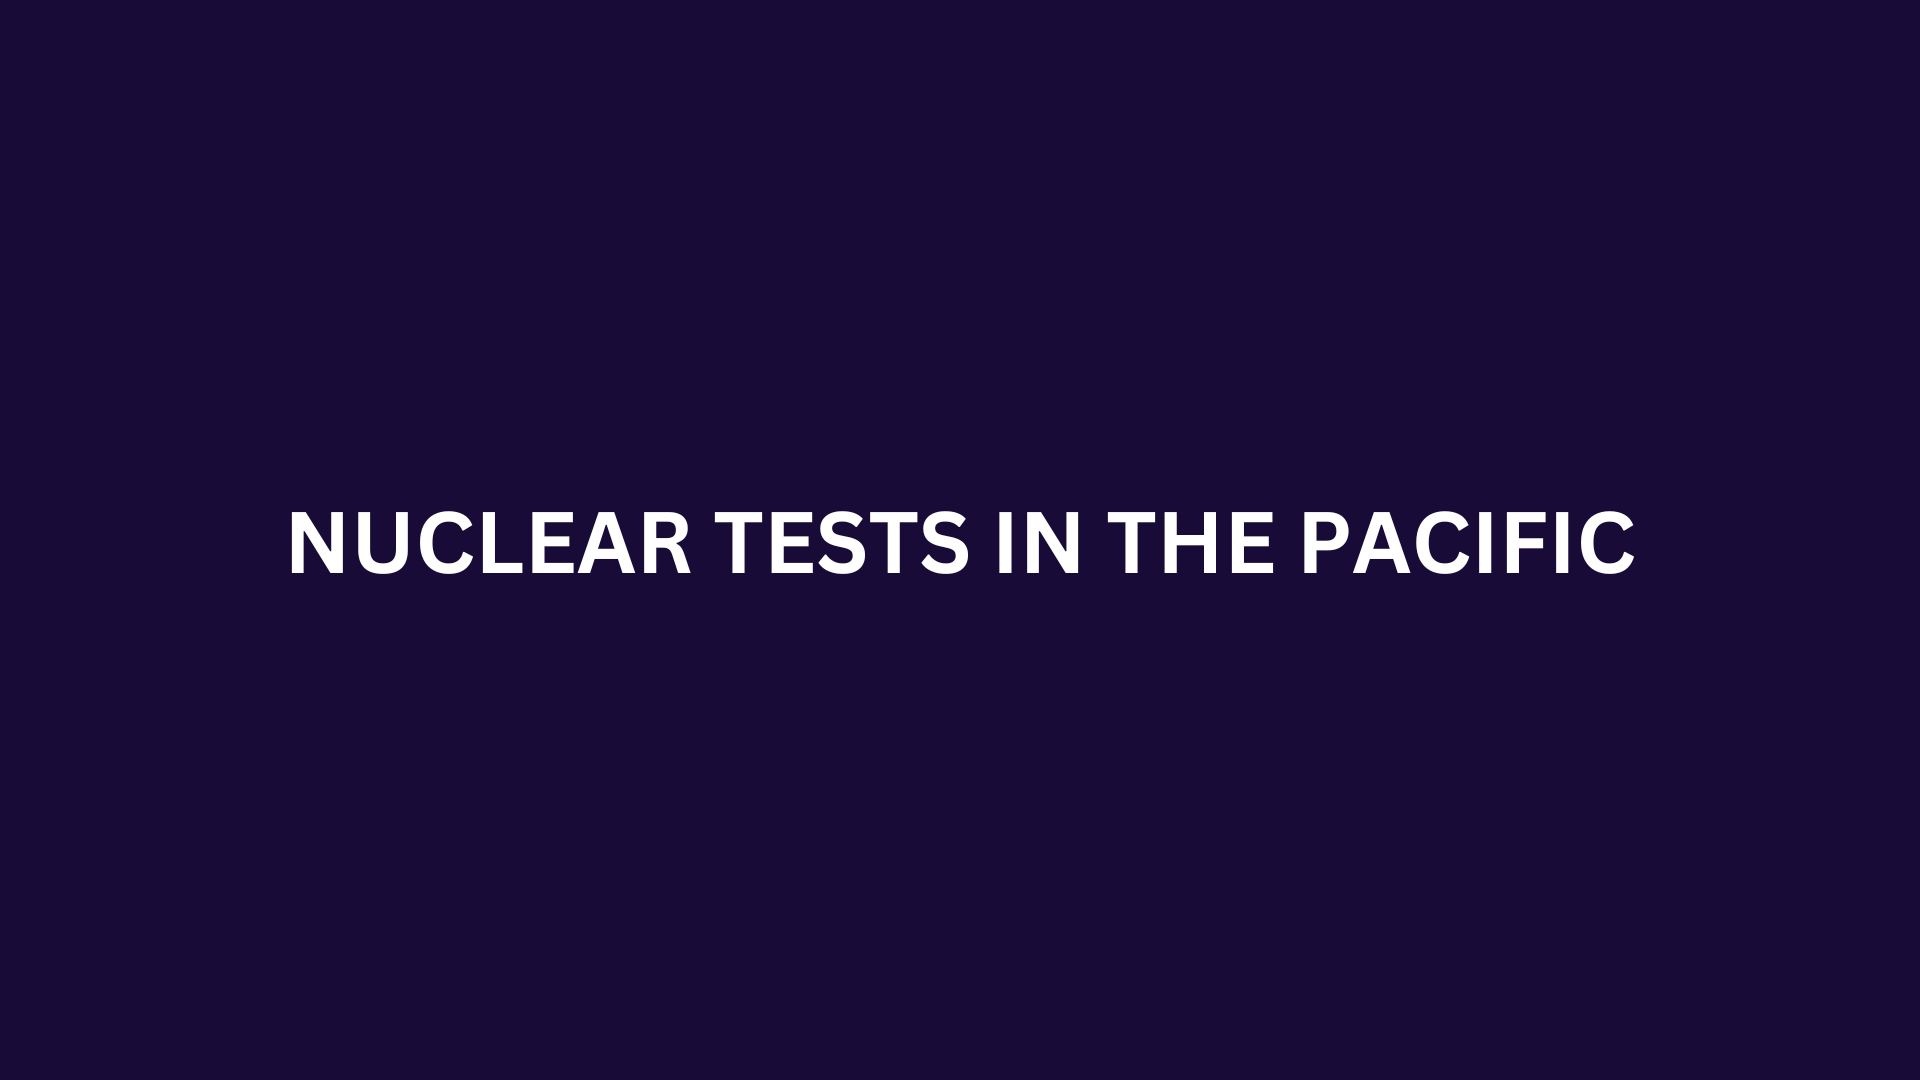 [Infographic] Nuclear Tests in the Pacific